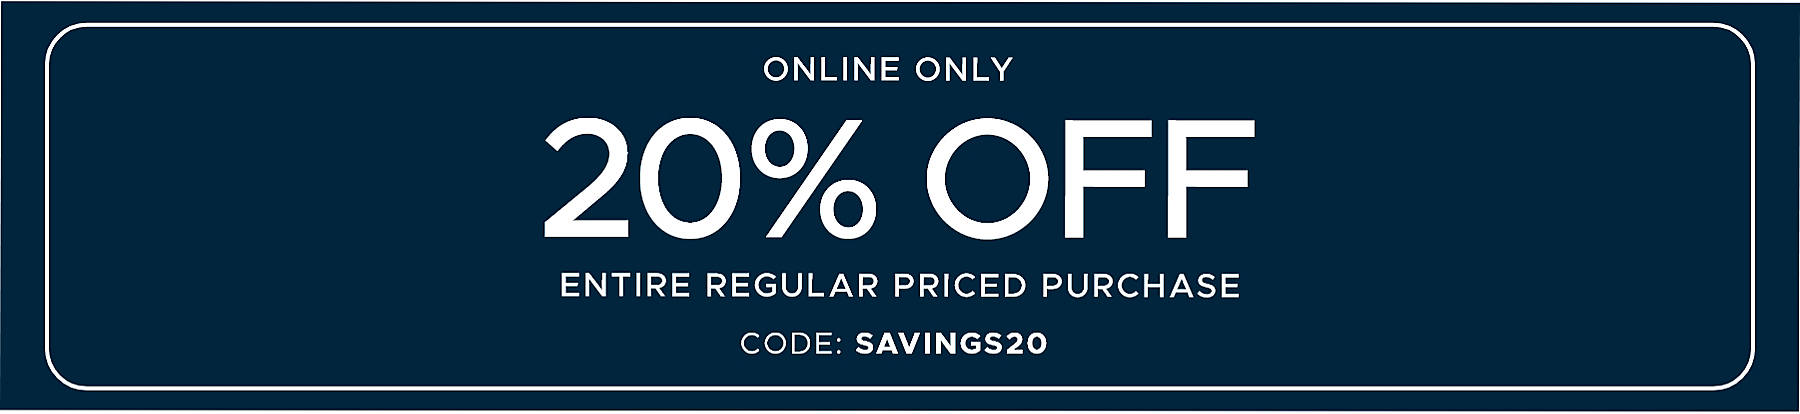 Online Only 20% off Entire Regular Priced Purchase code: SAVINGS20